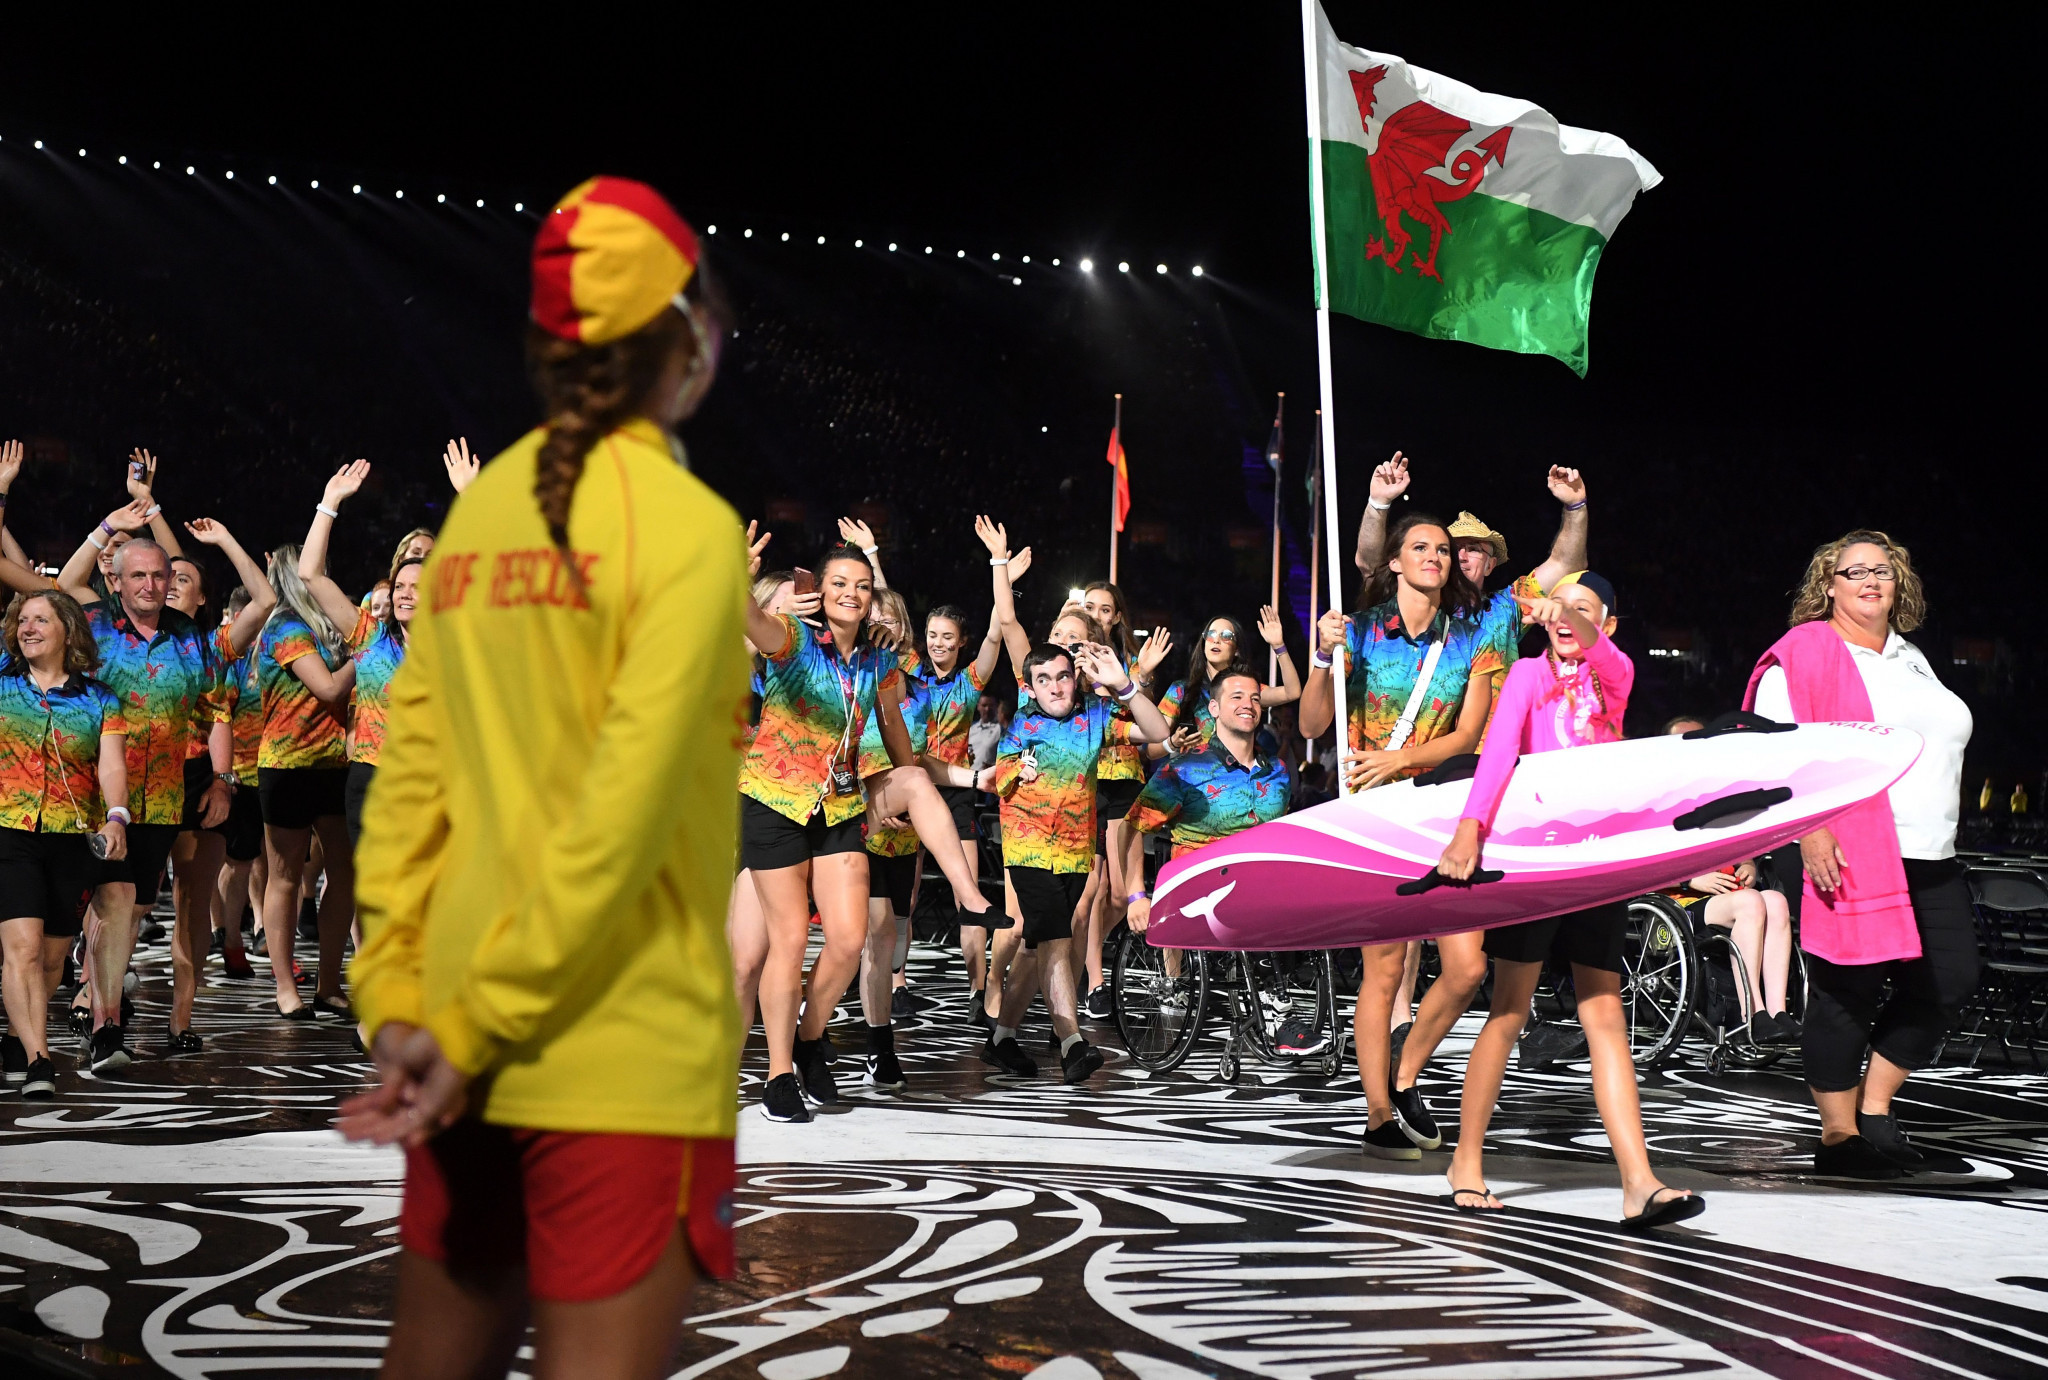 Commonwealth Games Wales will hope for a repeat of its Gold Coast 2018 success in Birmingham ©Getty Images